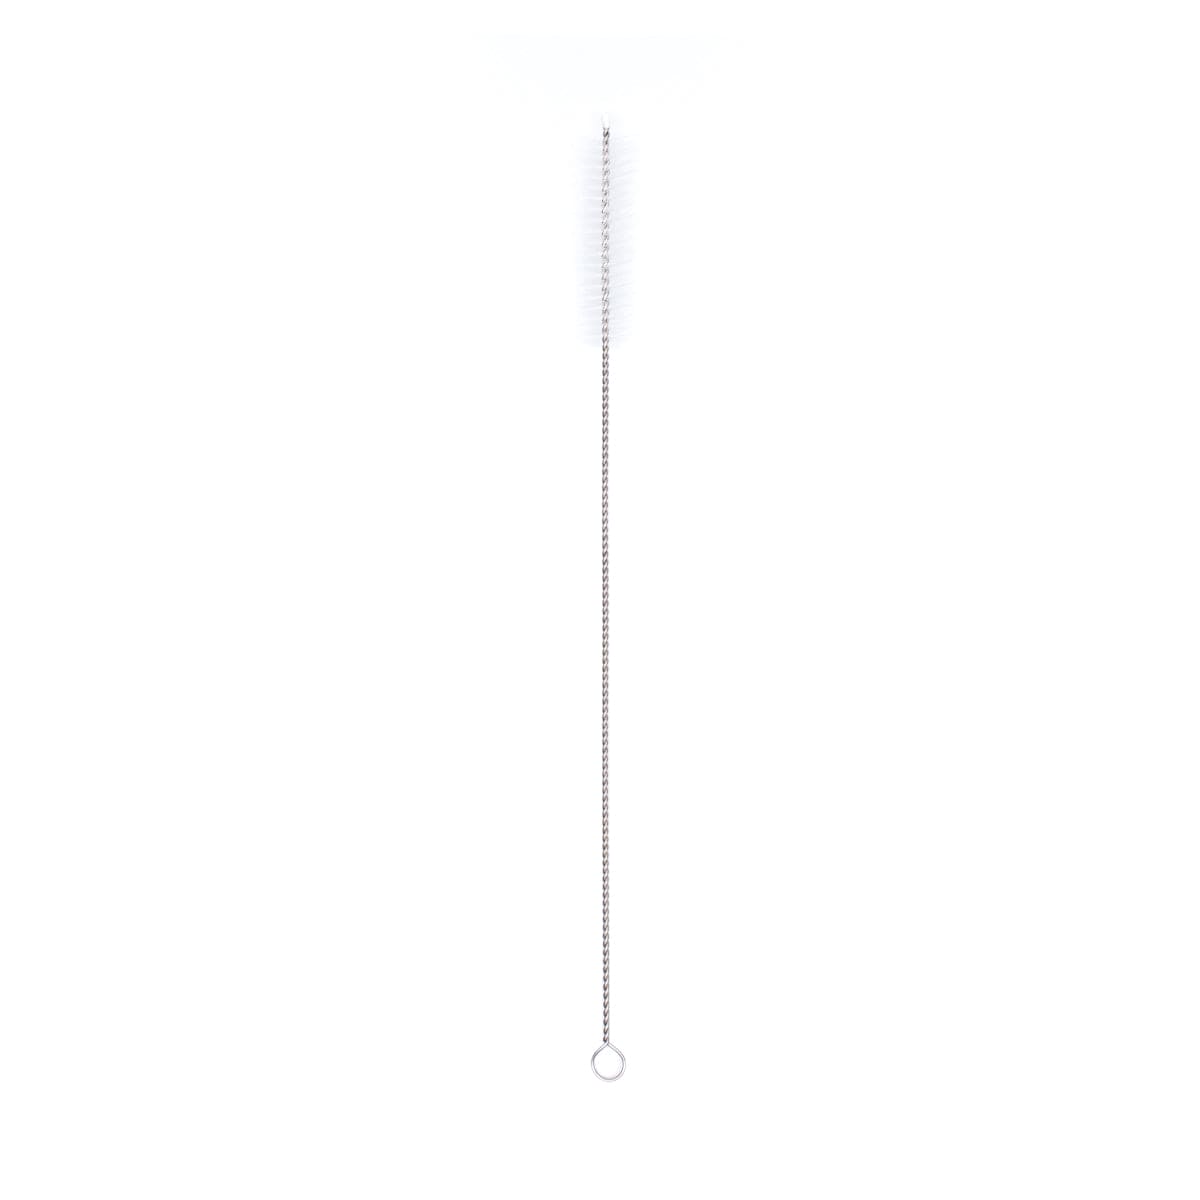 We Might Be Tiny Silicone Bubble Tea Straw, Set of 3